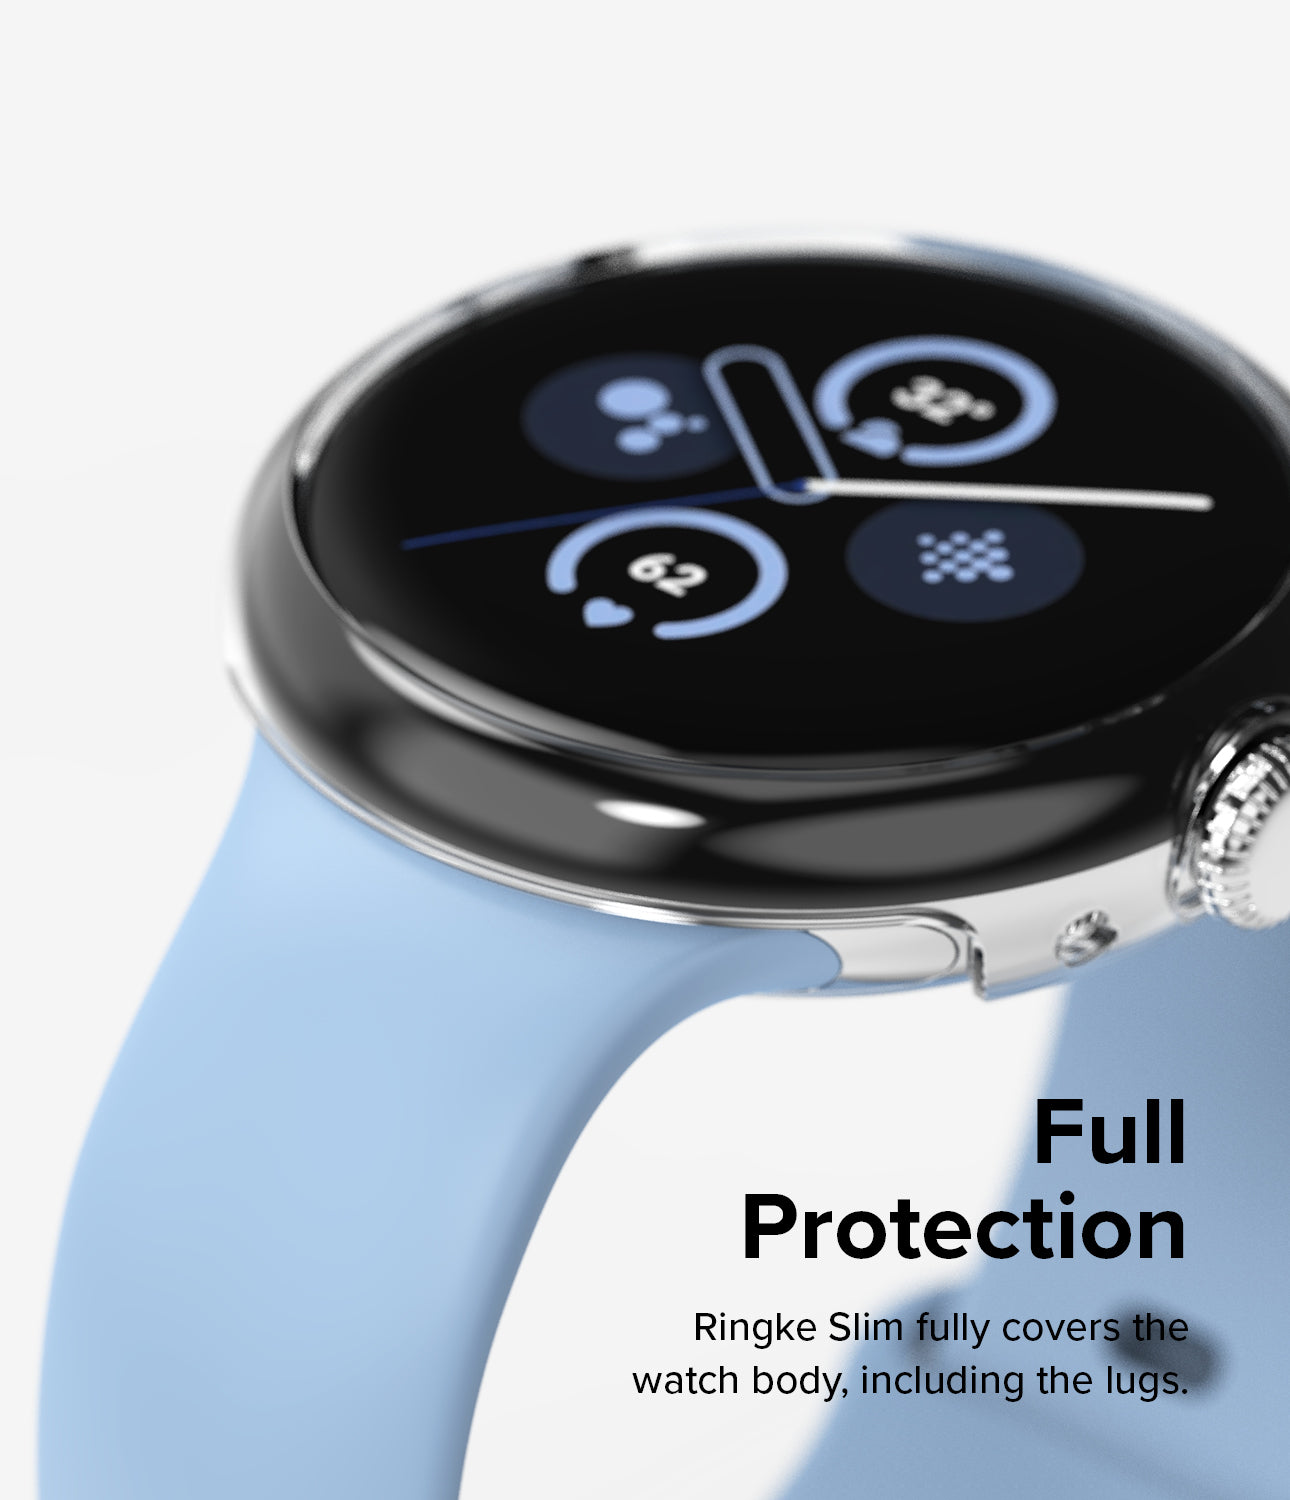 Google Pixel Watch 2 | Slim (2P) - Full Protection. Ringke Slim fully covers the watch body, including the lugs.